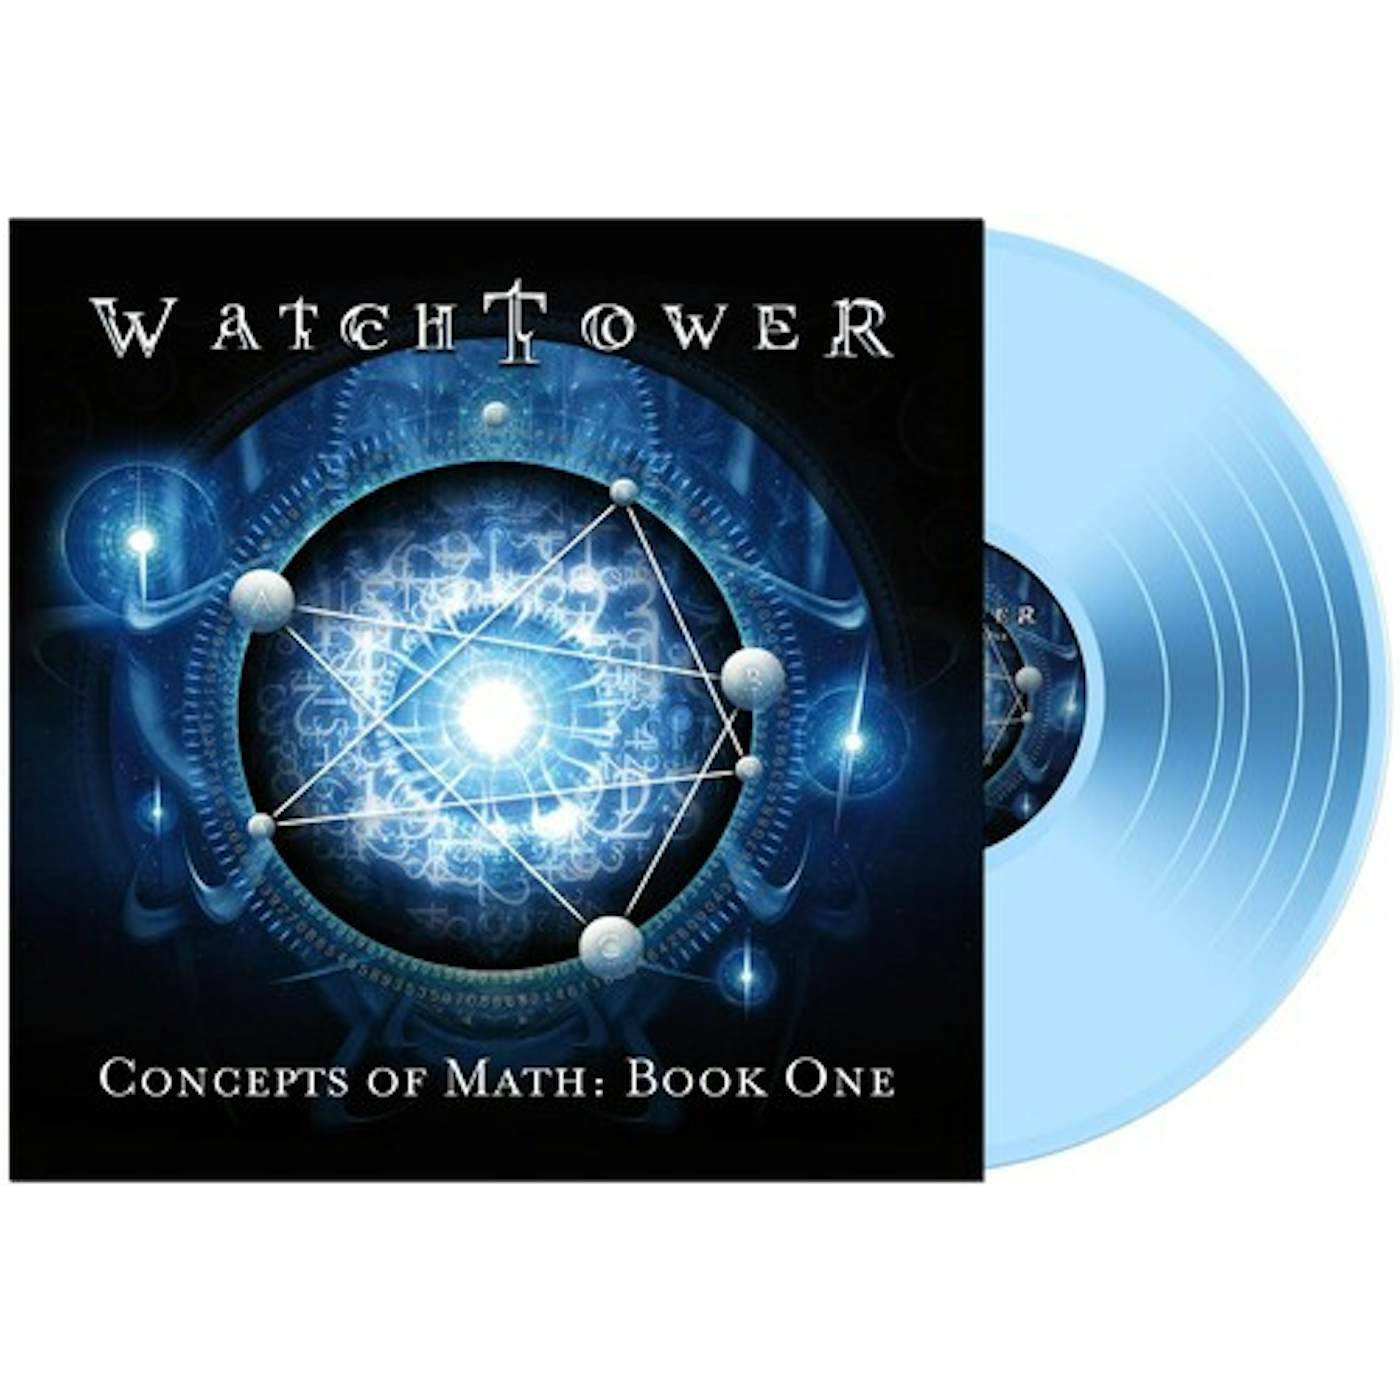 Watchtower Concepts of Math: Book One Vinyl Record